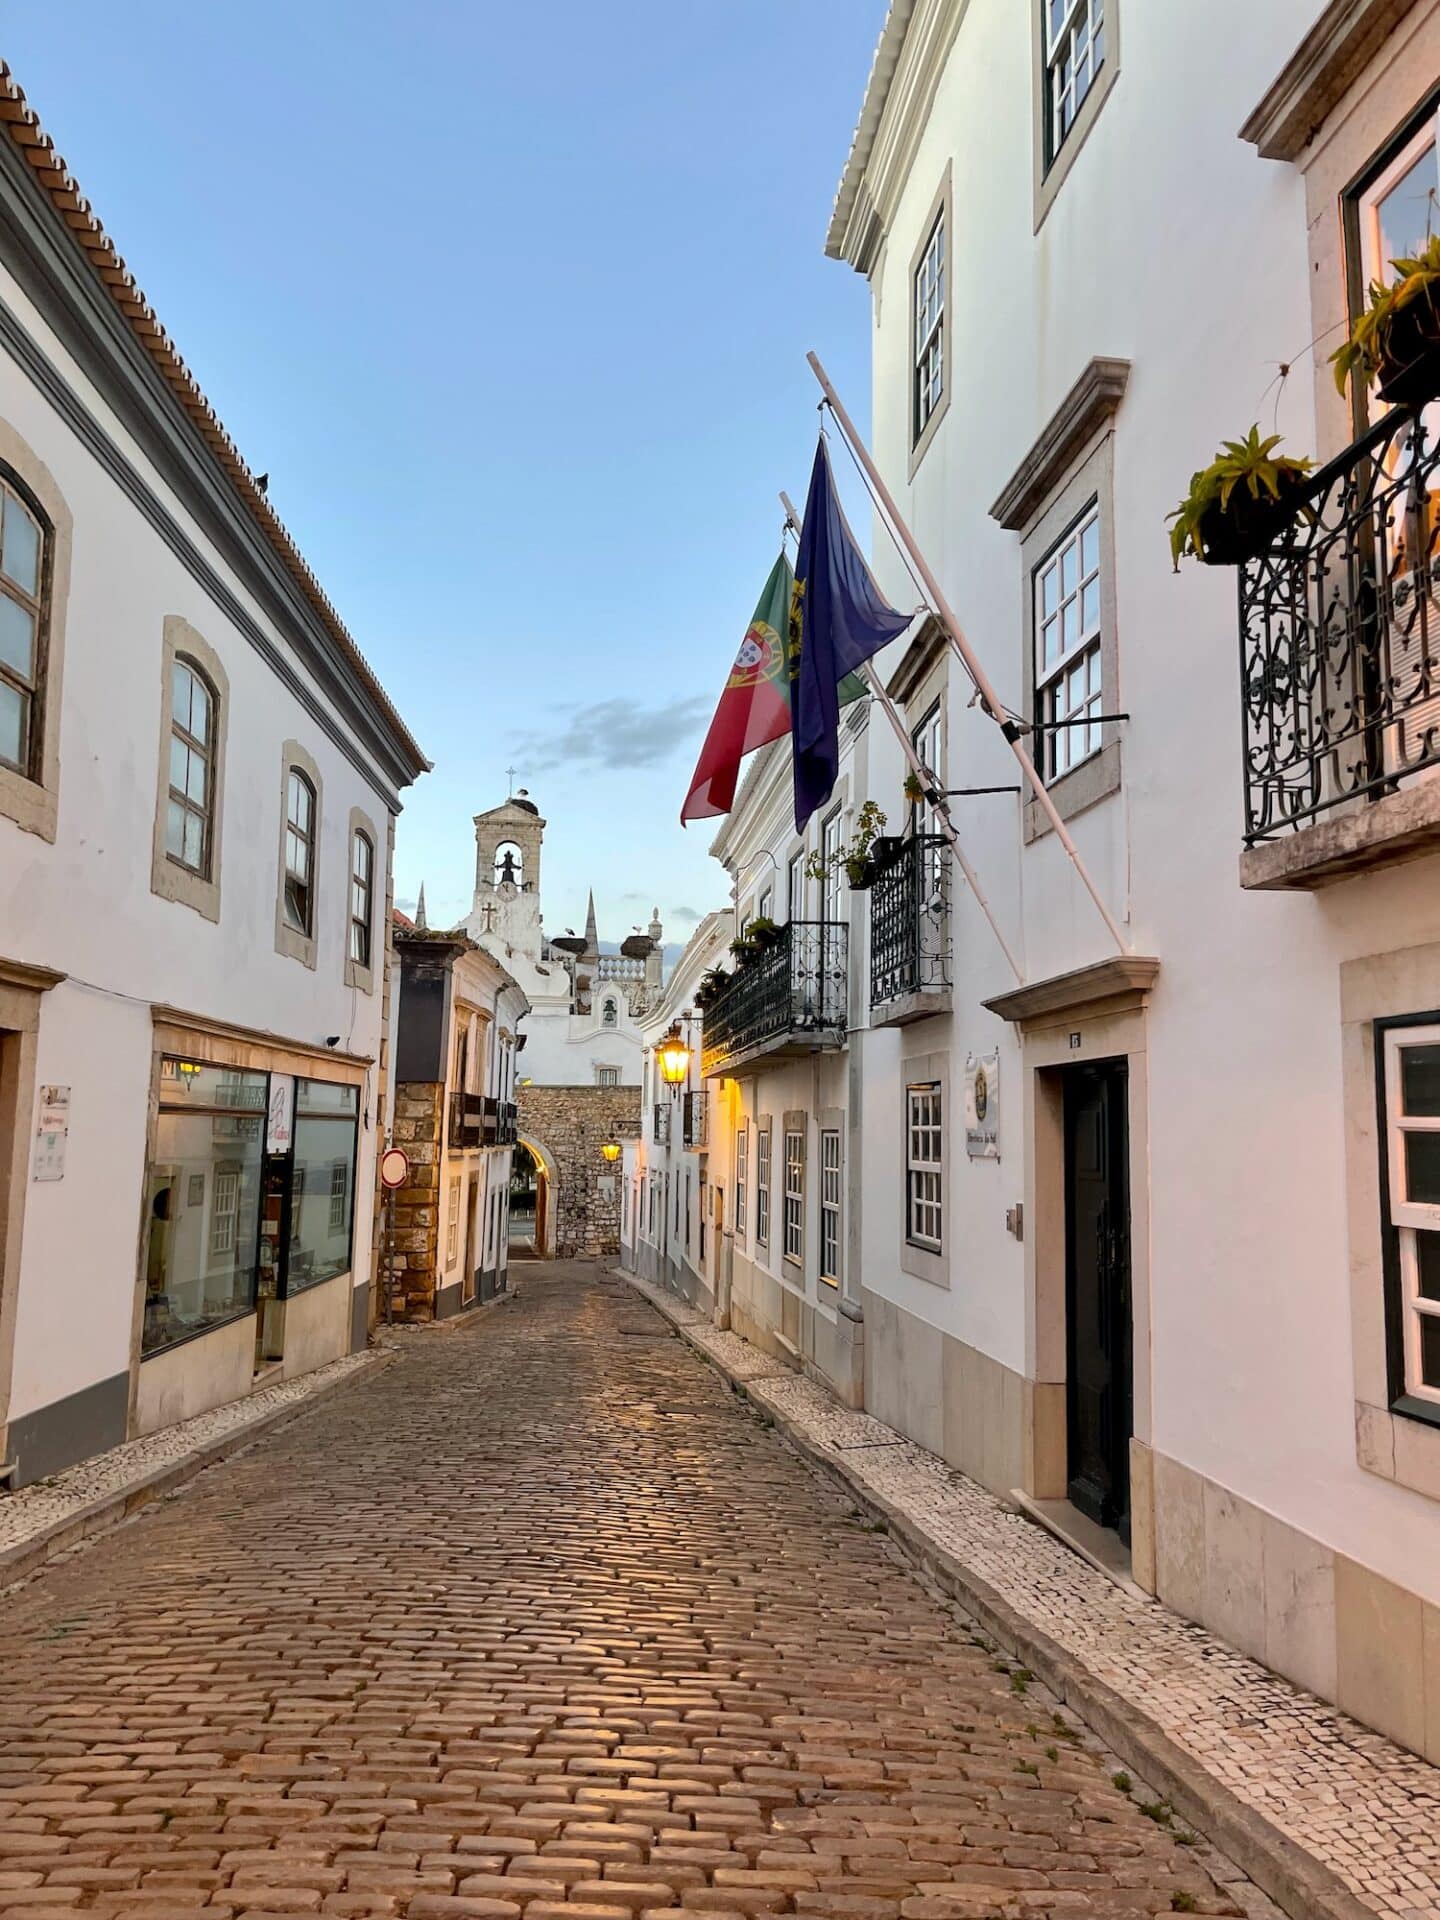 Twilight descends on the cobblestone streets of Faro, with Portuguese and European Union flags hanging above, and a white baroque church in the distance.